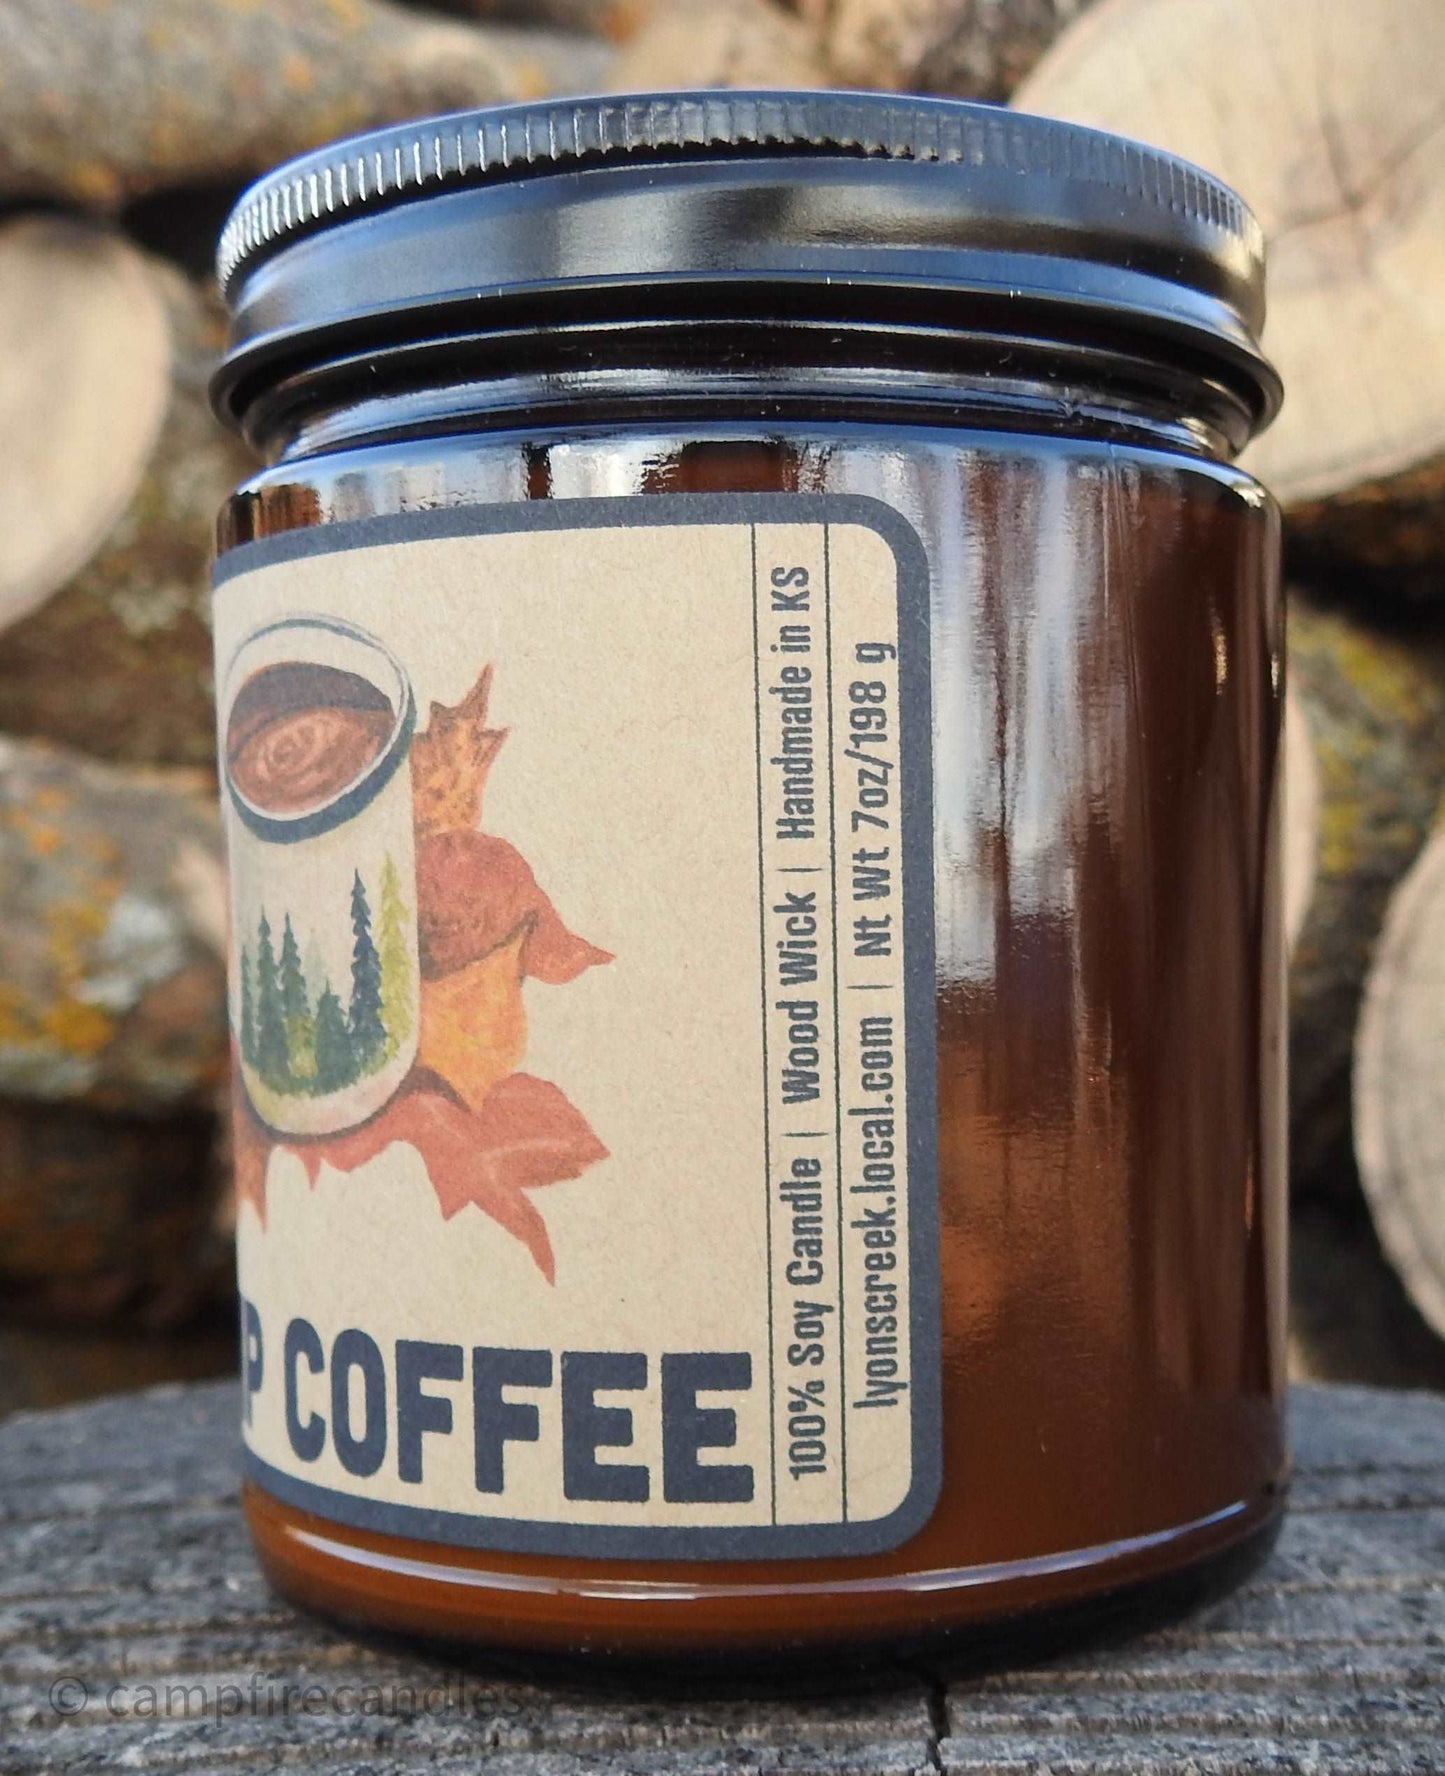 Camp Coffee | Soy Candle with Wooden Wick | Campfire Candles